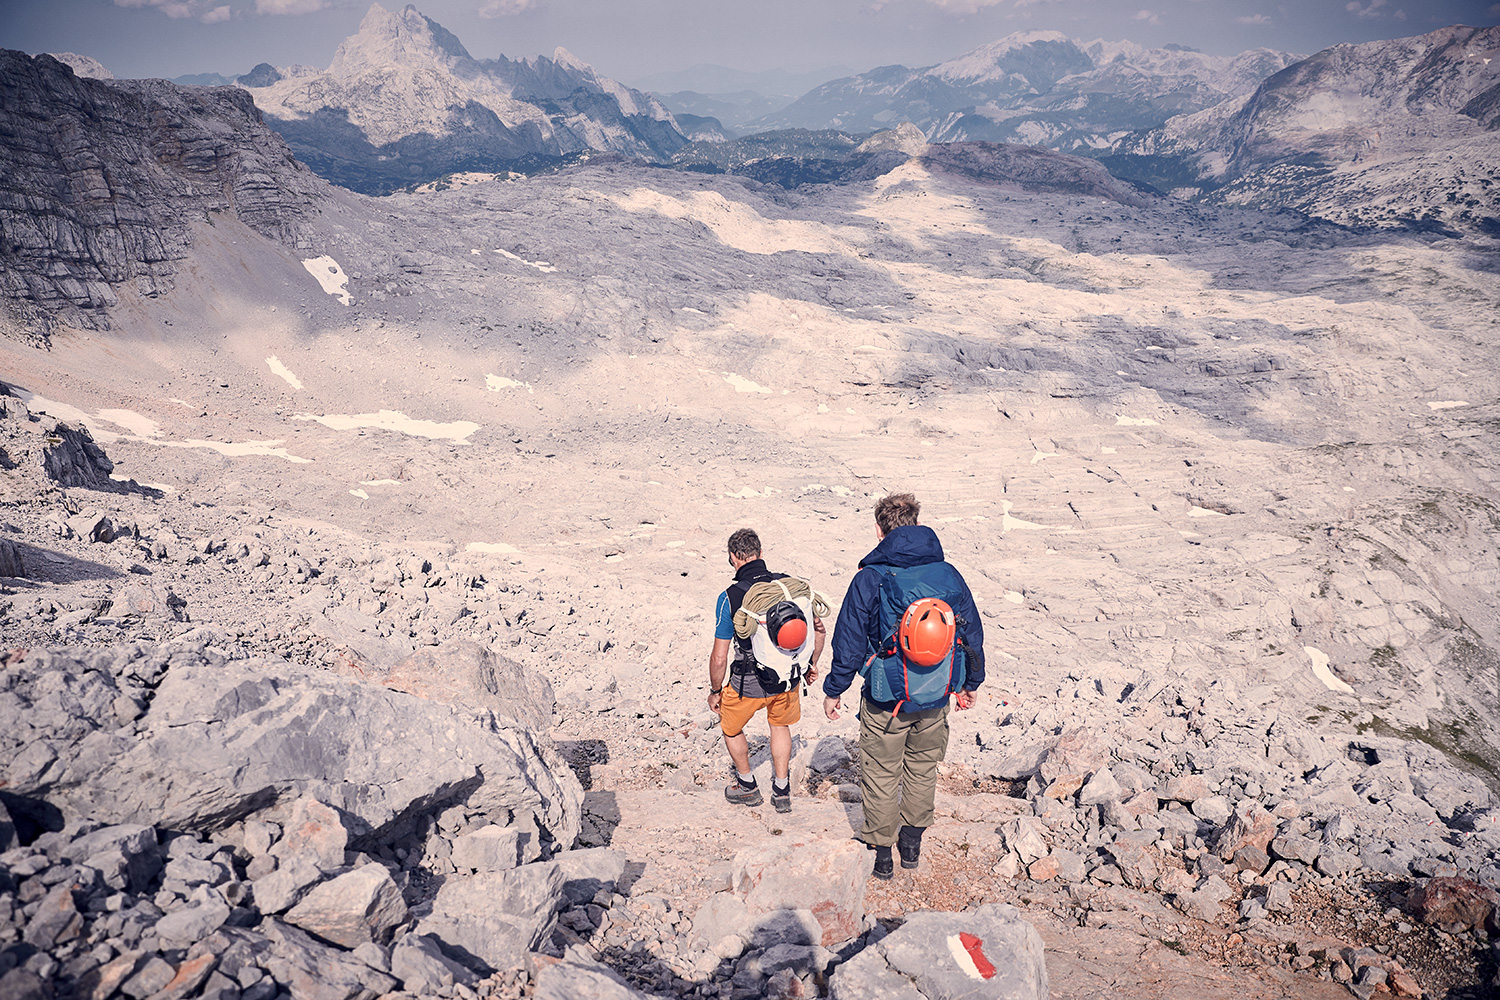 WALDEN Magazin founders on a mountaineering trip in Salzburger Land